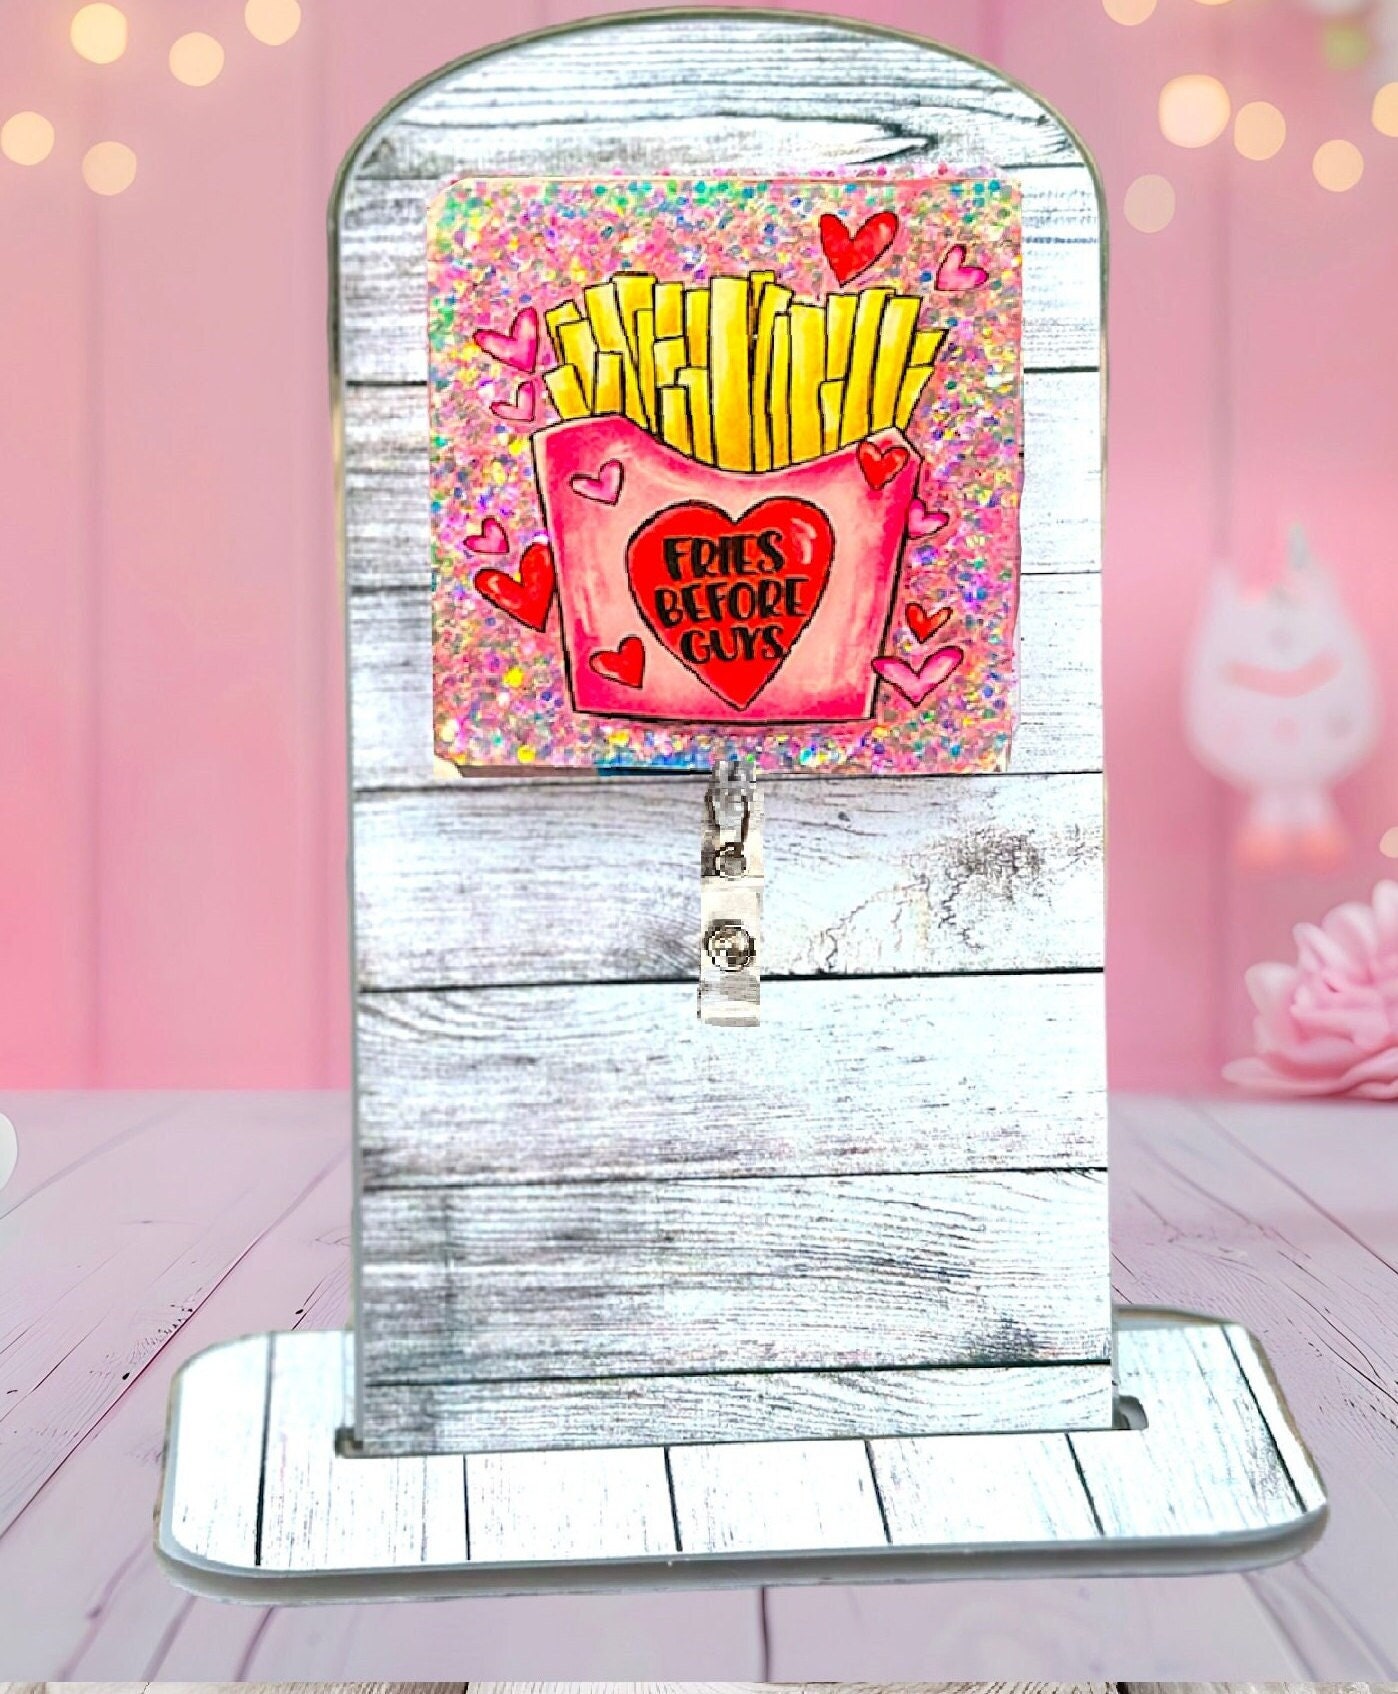 Trendy 2 Fries Before Guys Badge Reel, Quirky Work ID Holder